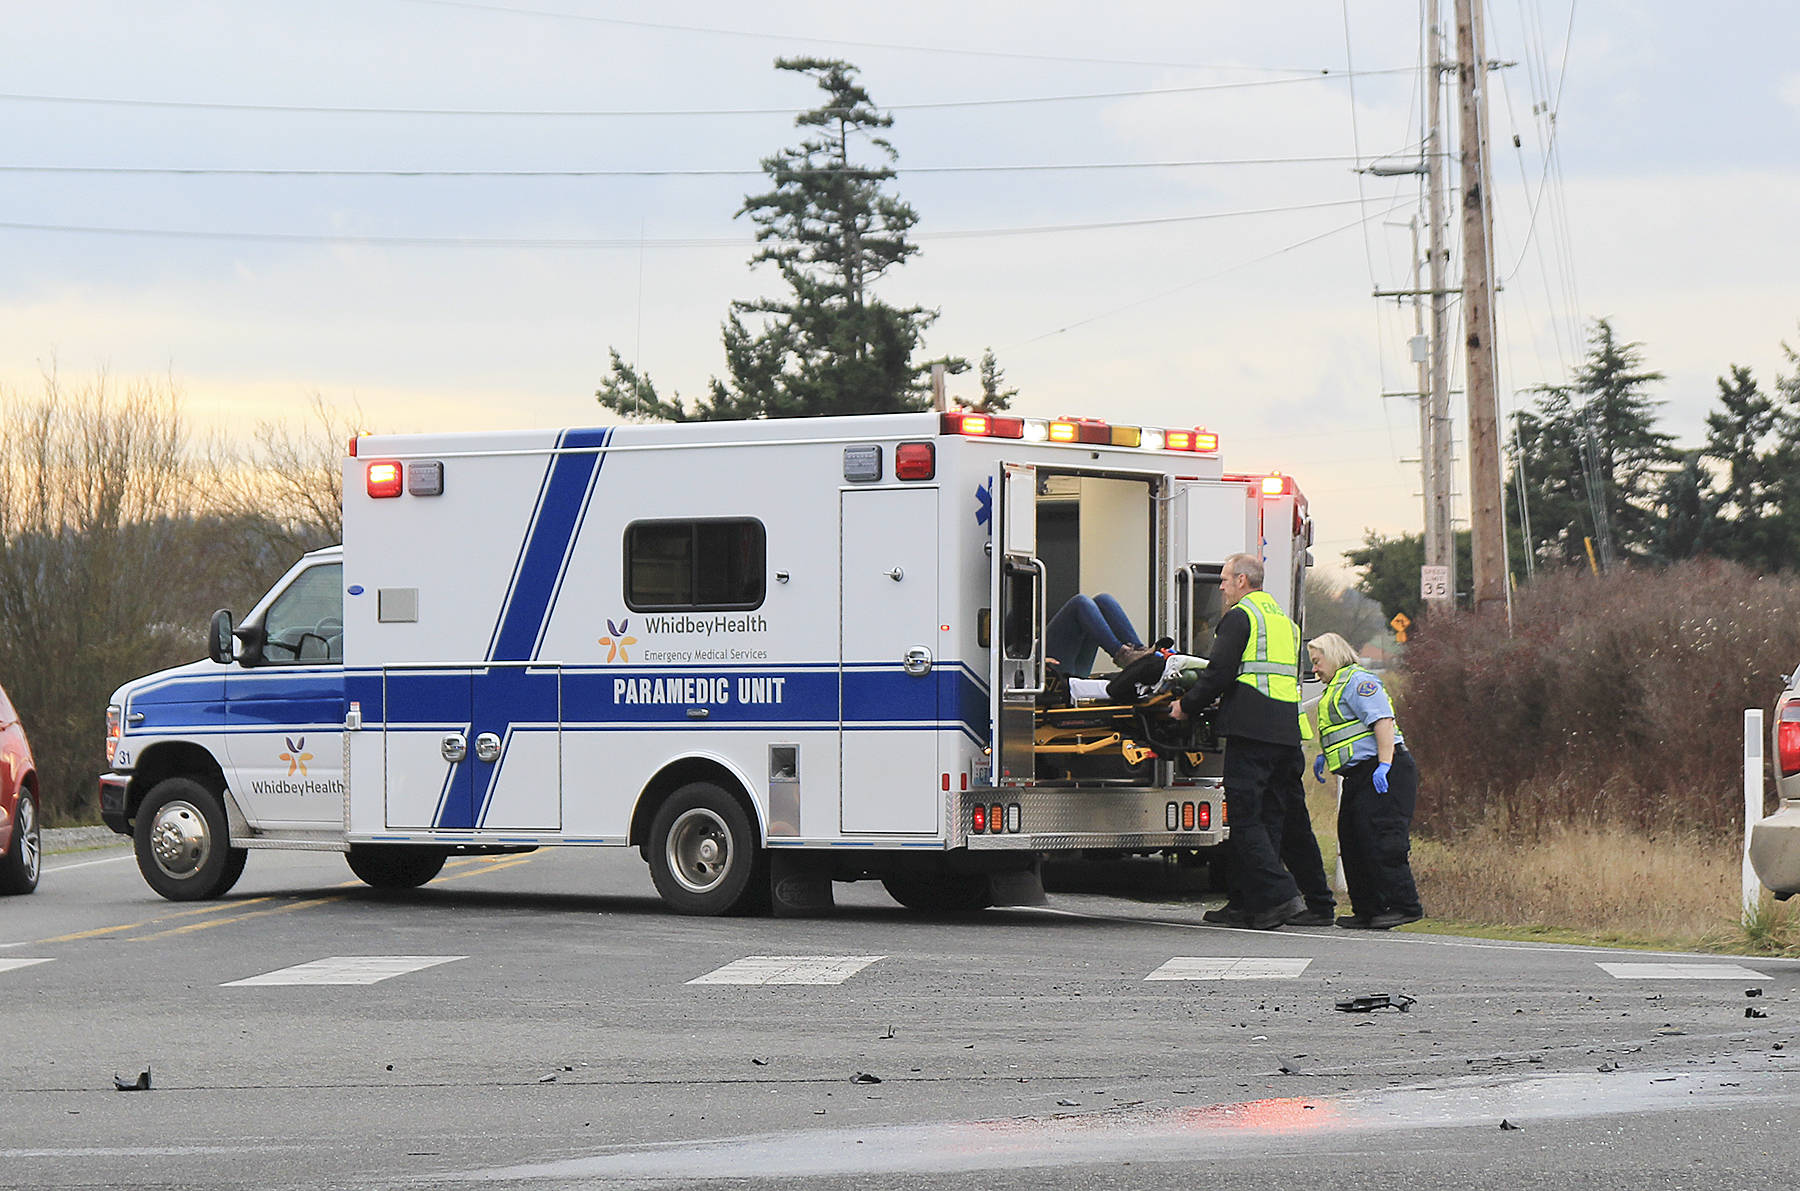 First responders transport someone from the scene of a three-car collision Thursday to WhidbeyHealth Medical Center. Photo by Laura Guido/Whidbey News-Times